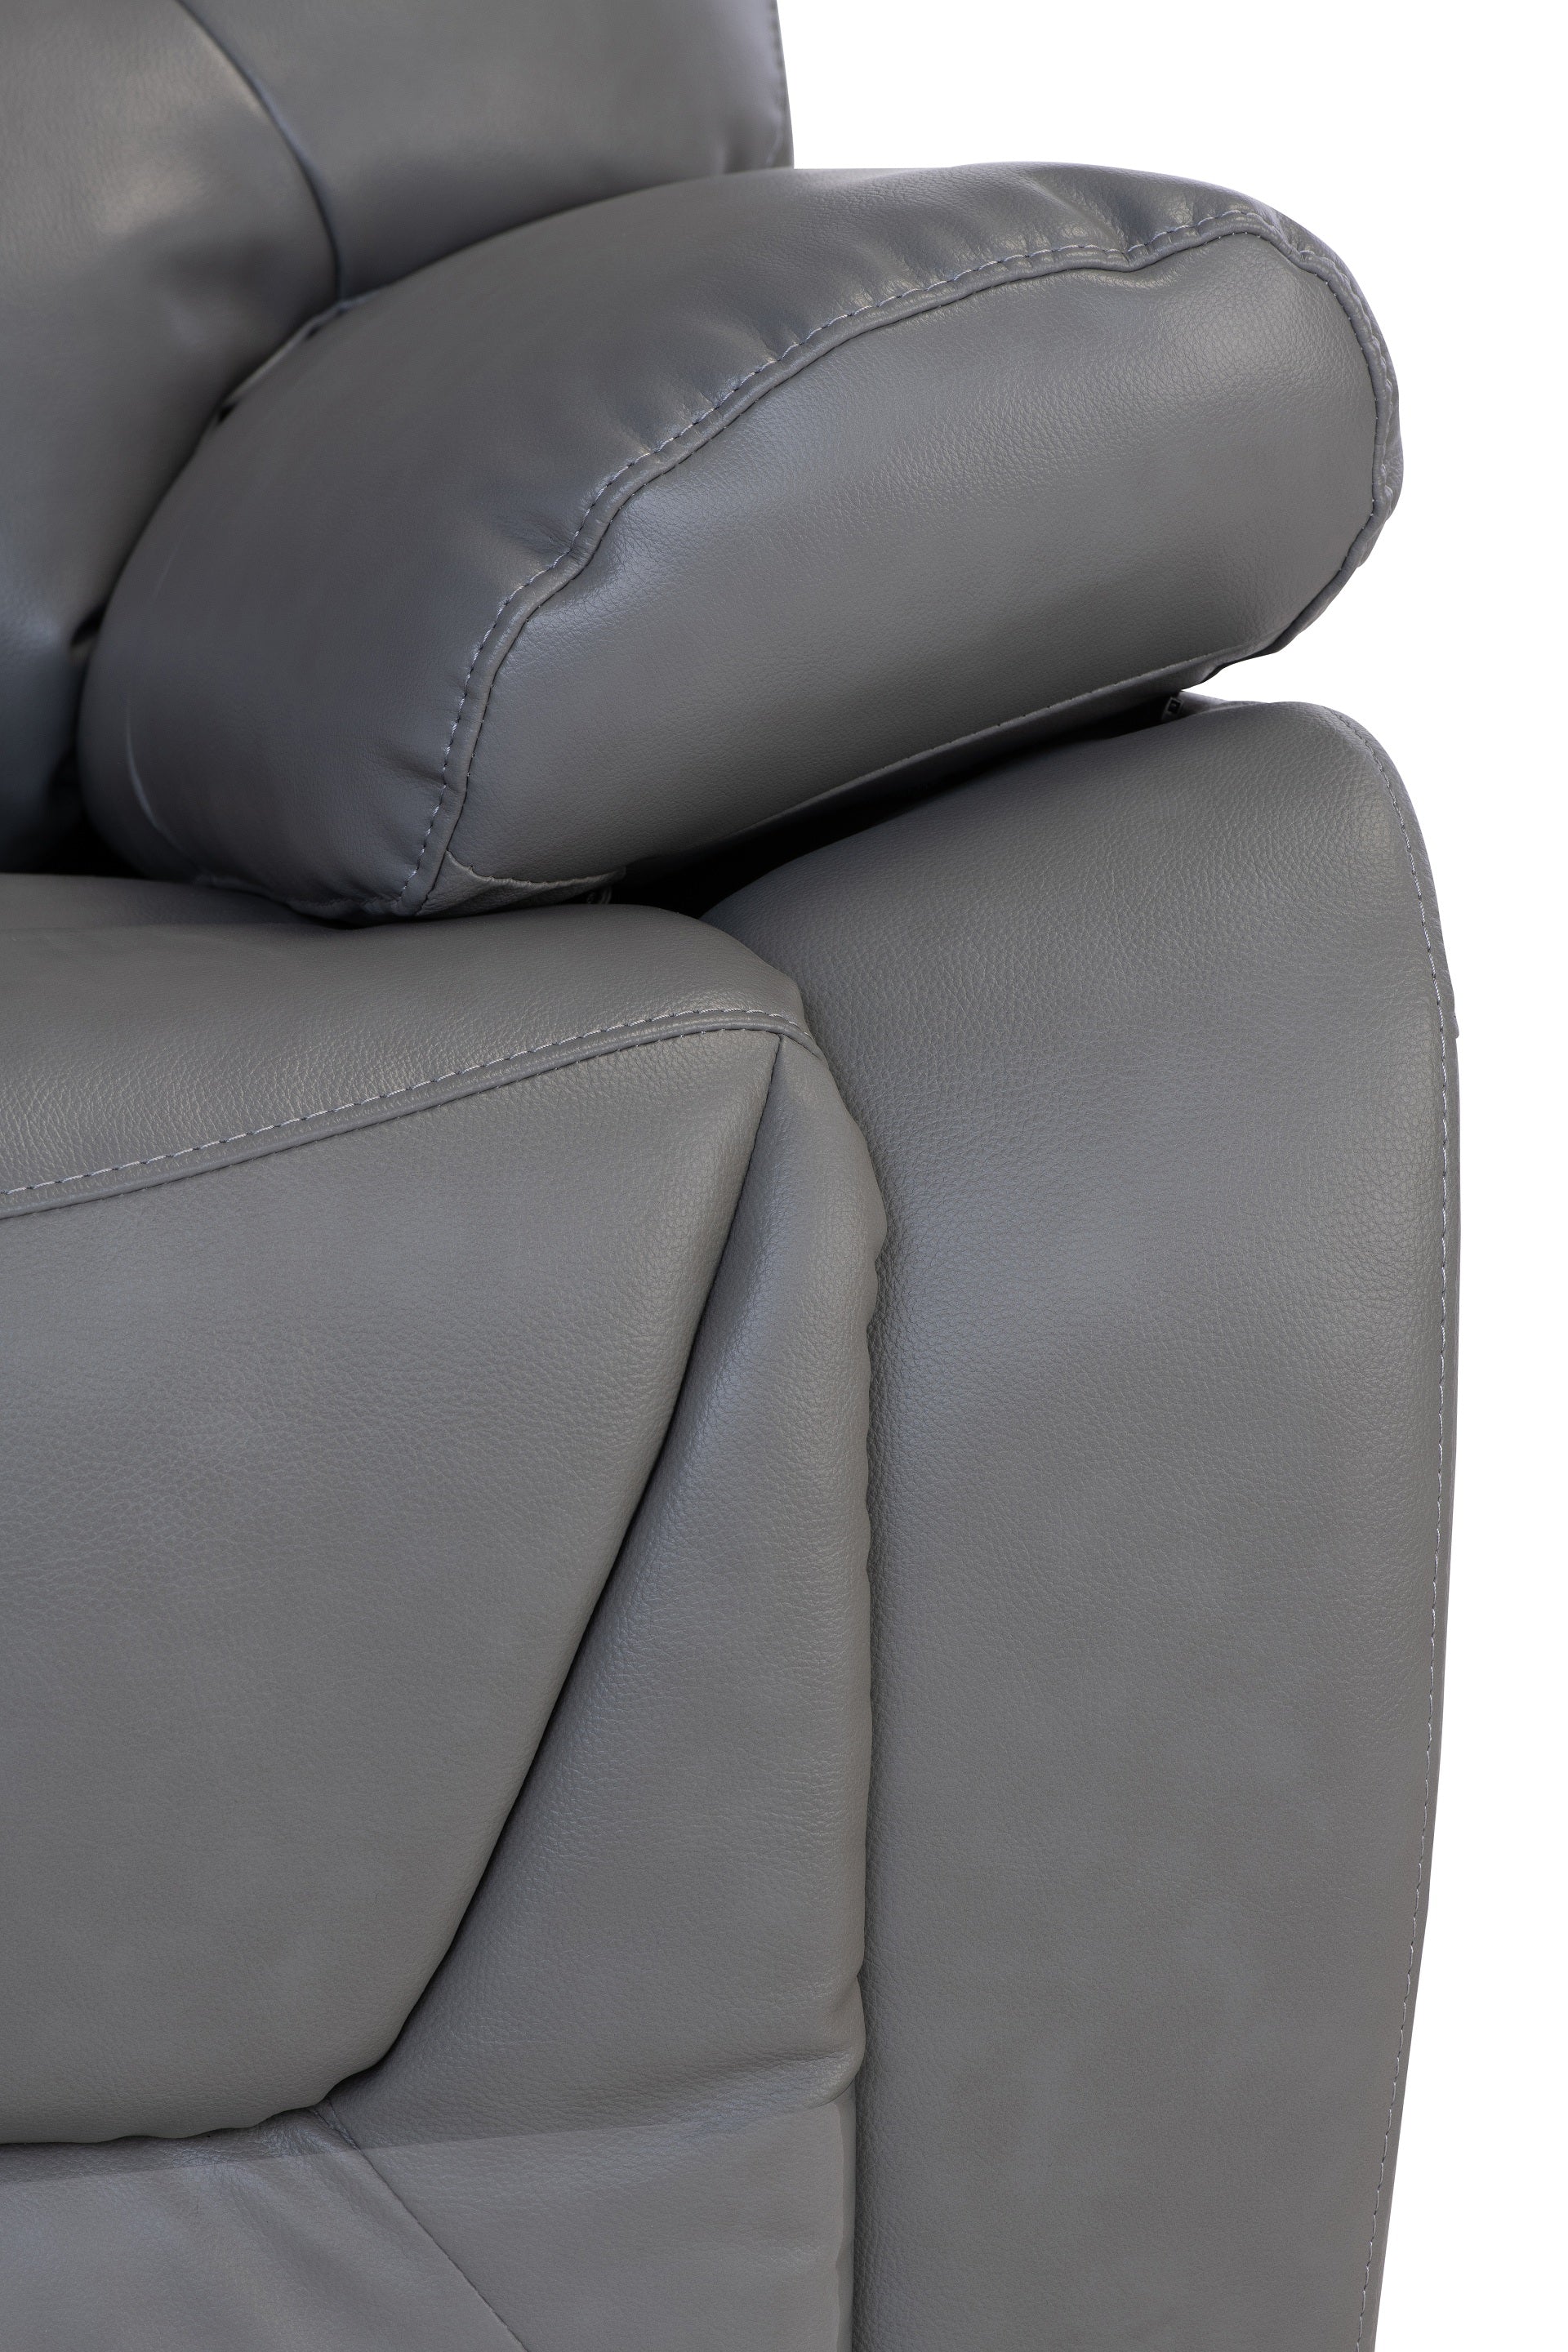 Darah Leather Electric 3 Seater Recliner - Grey